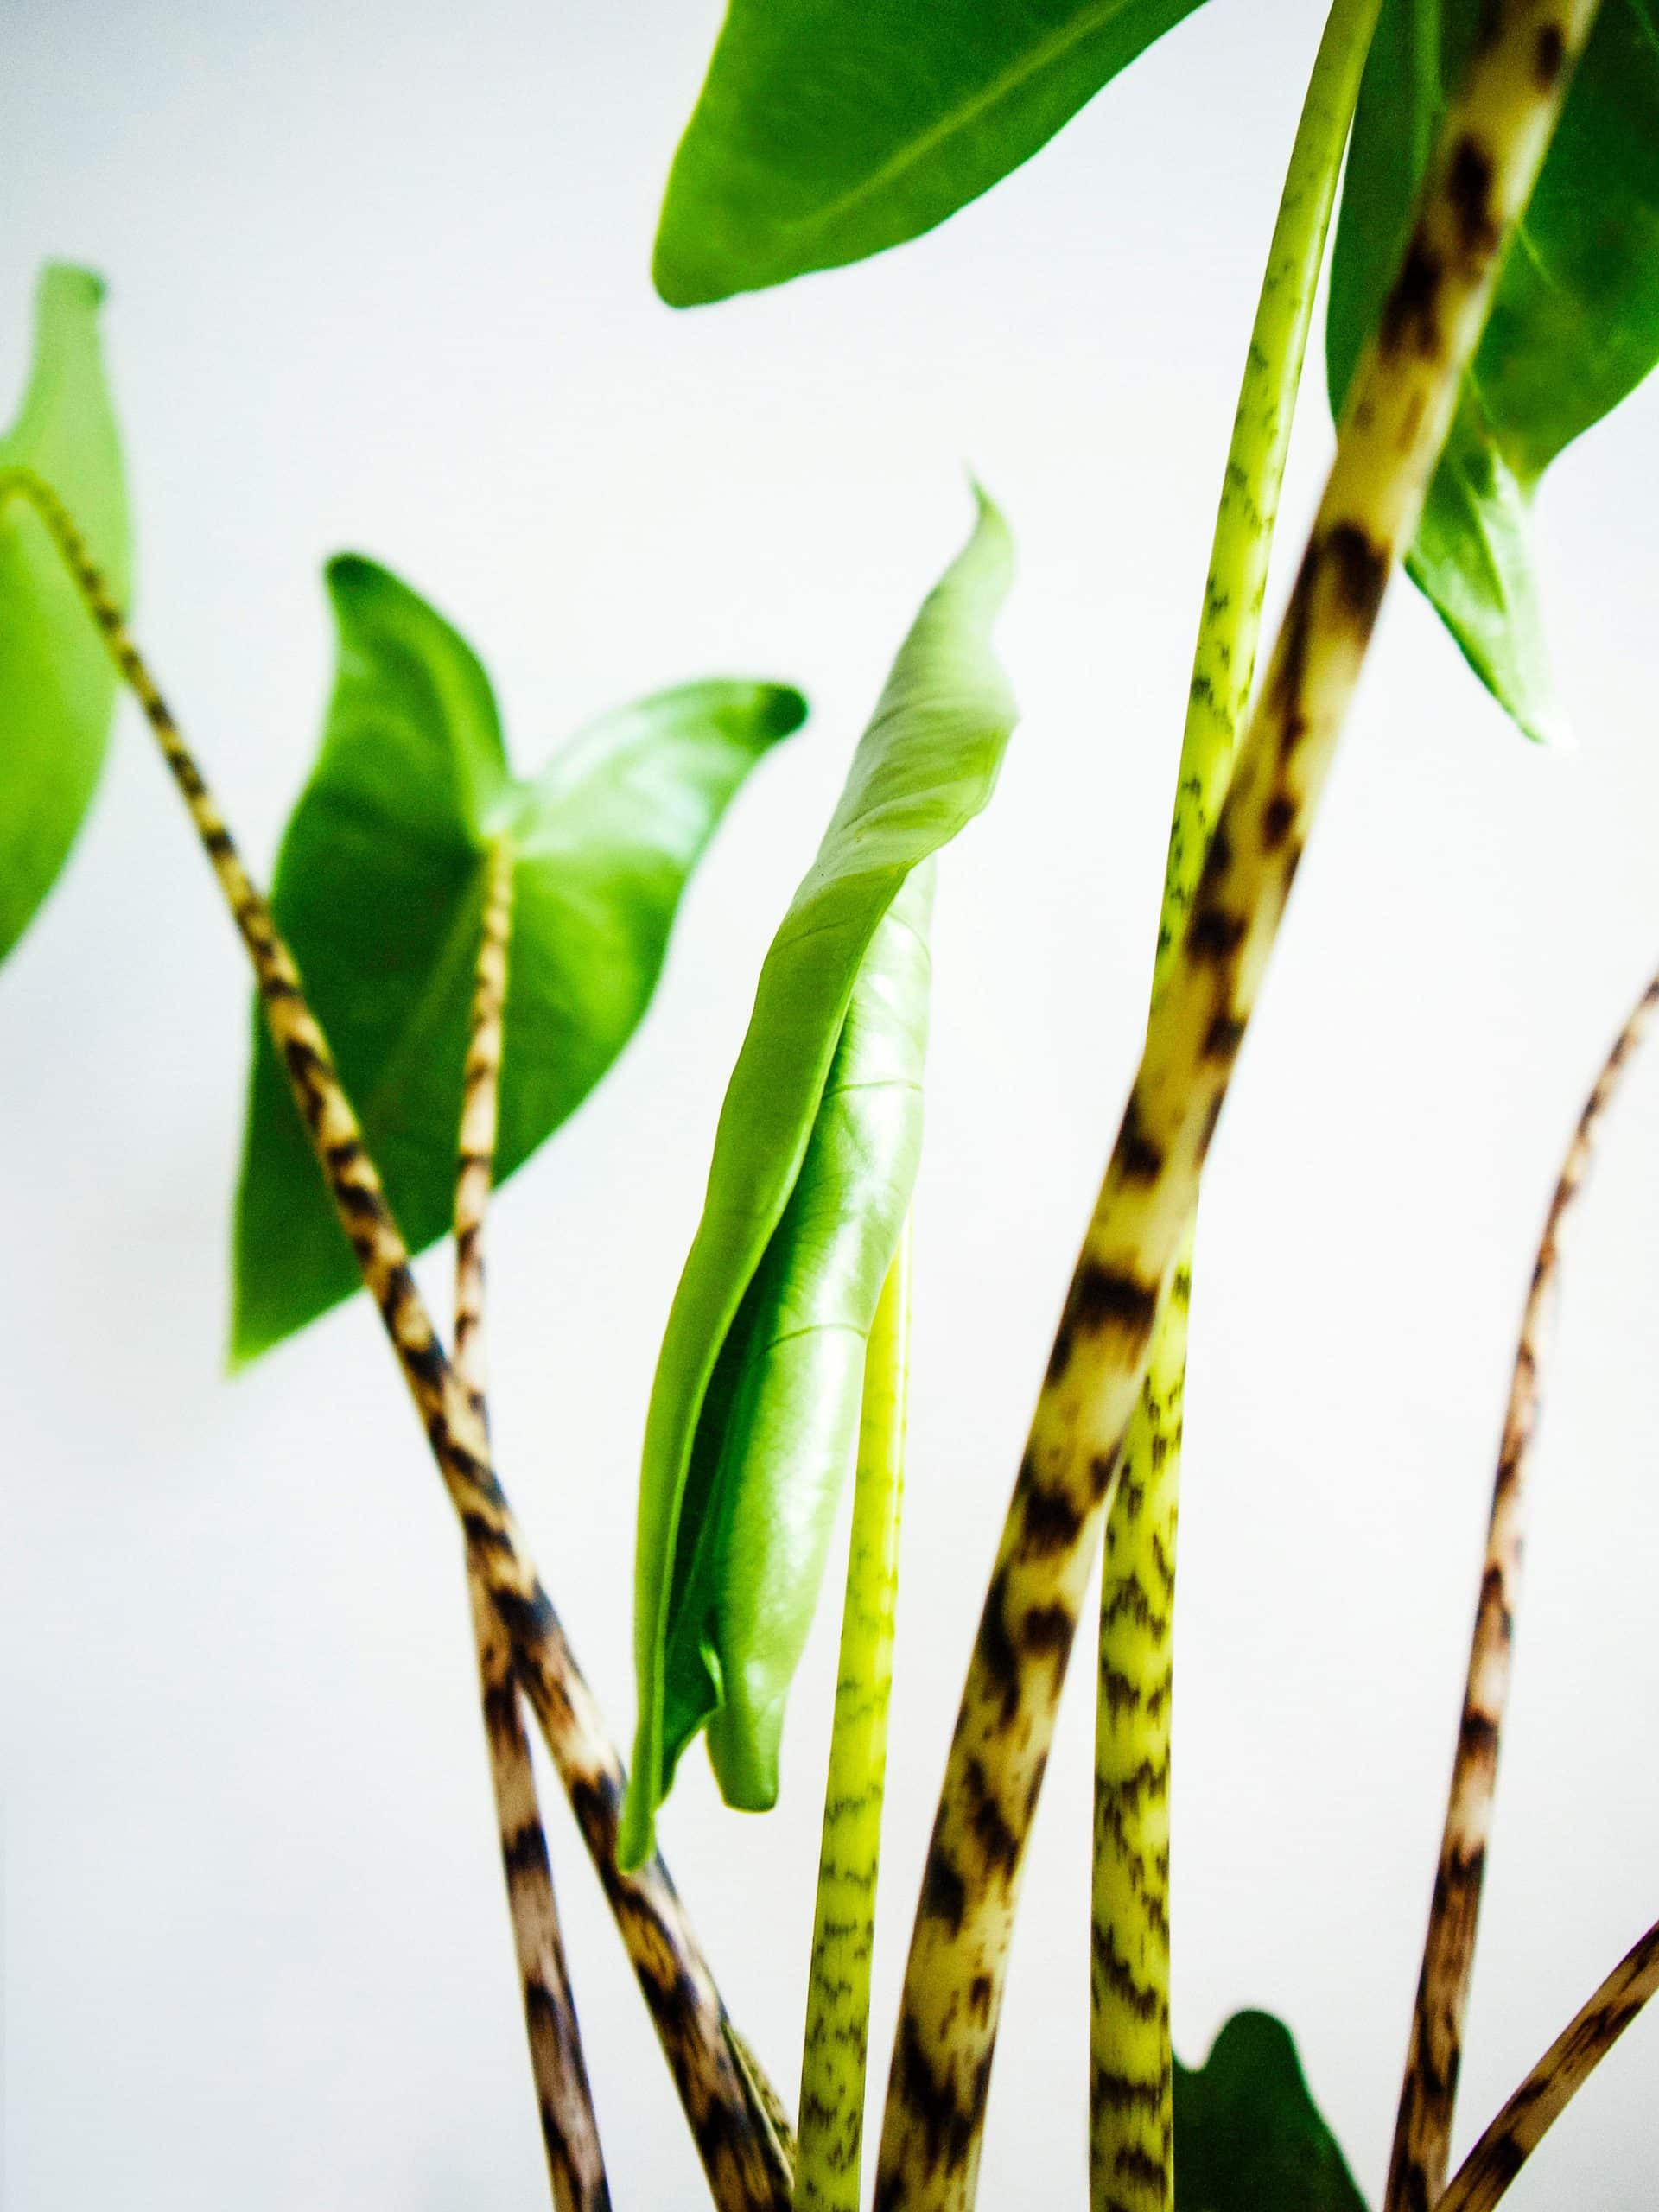 Close-up of patterned petioles and a new leaf unfurling on Alocasia zebrina plant